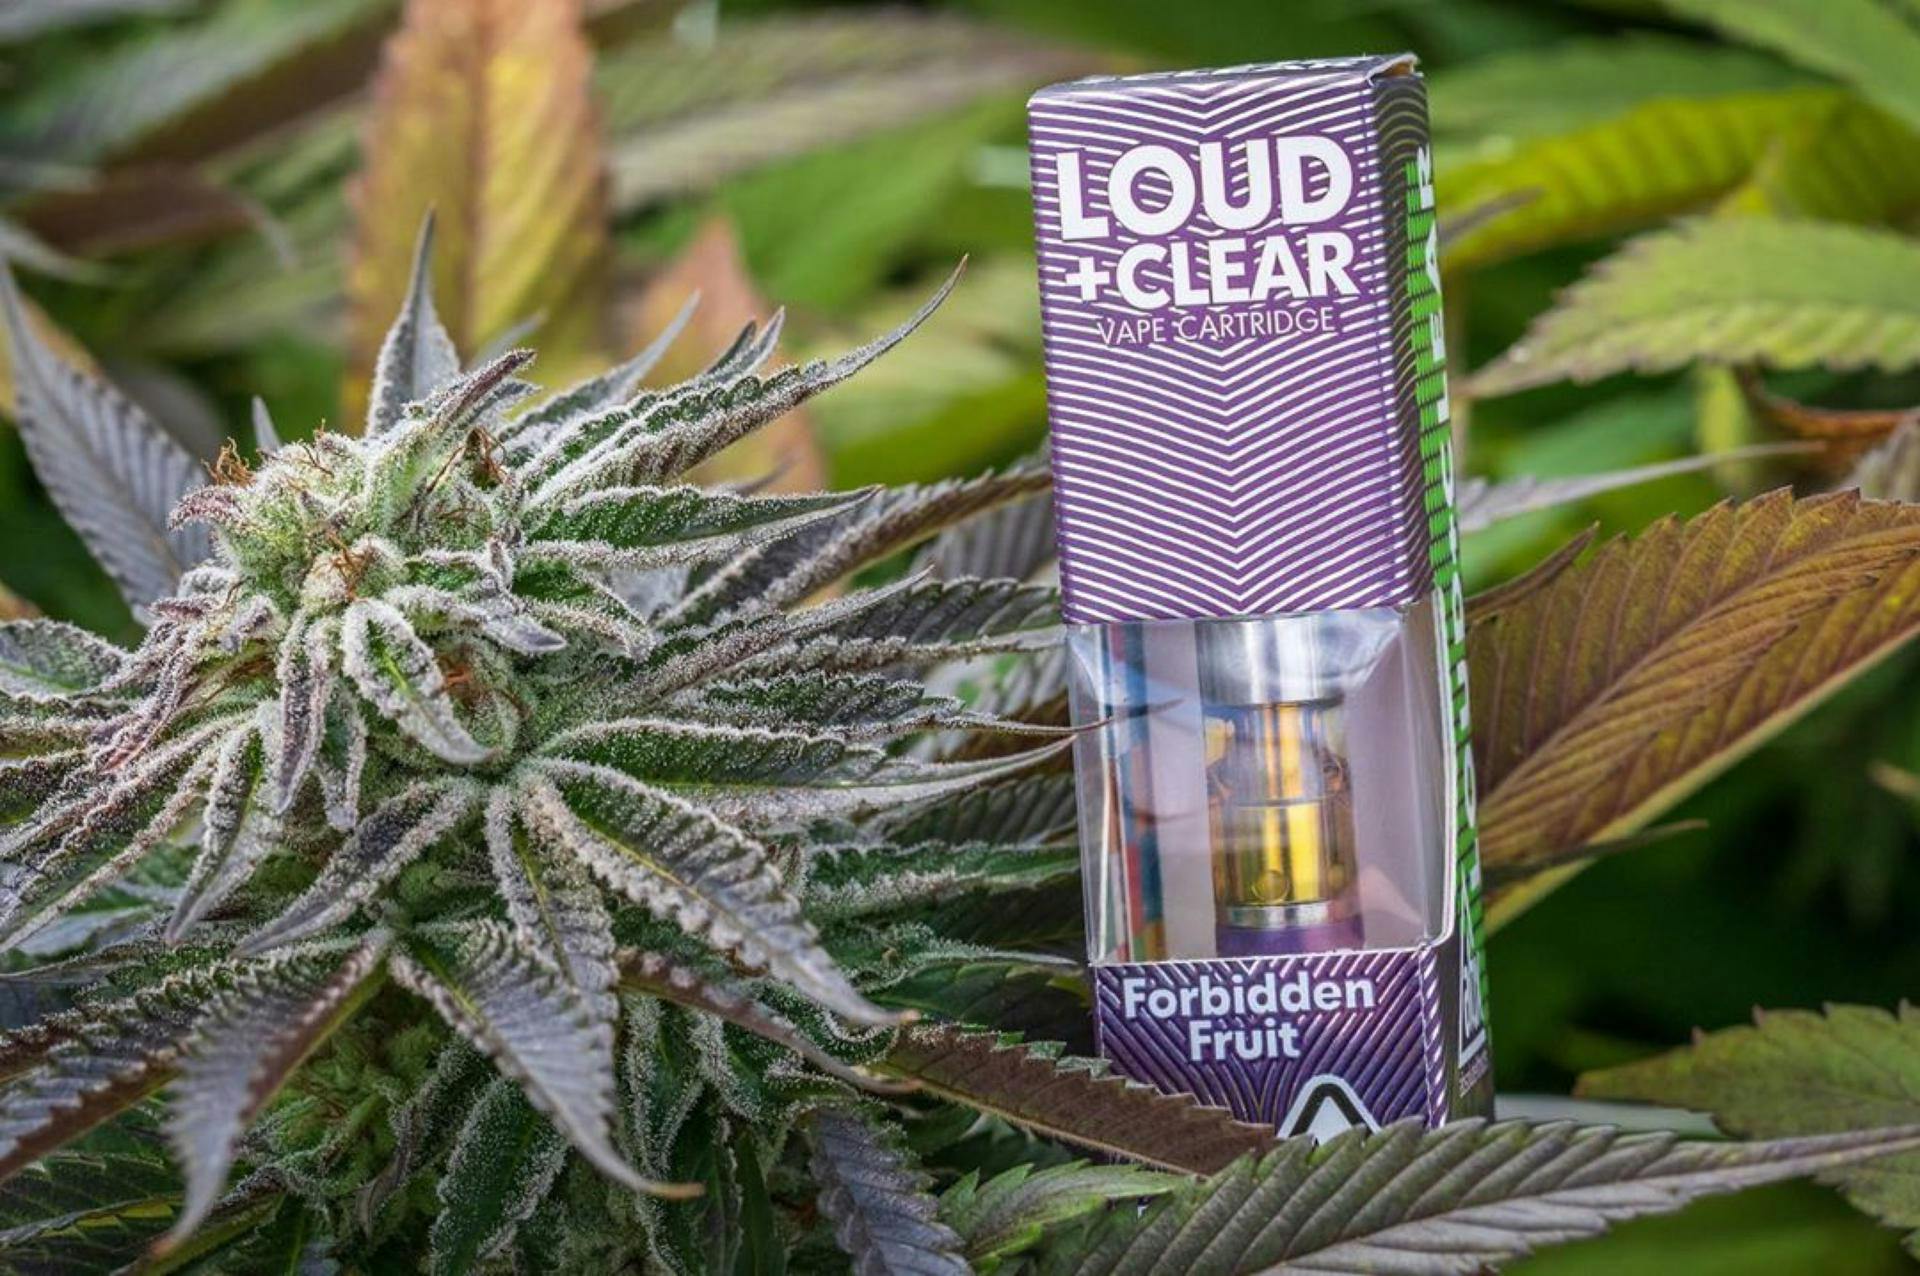 AbsoluteXtracts Loud & Clear Forbidden Fruit live resin cannabis vape